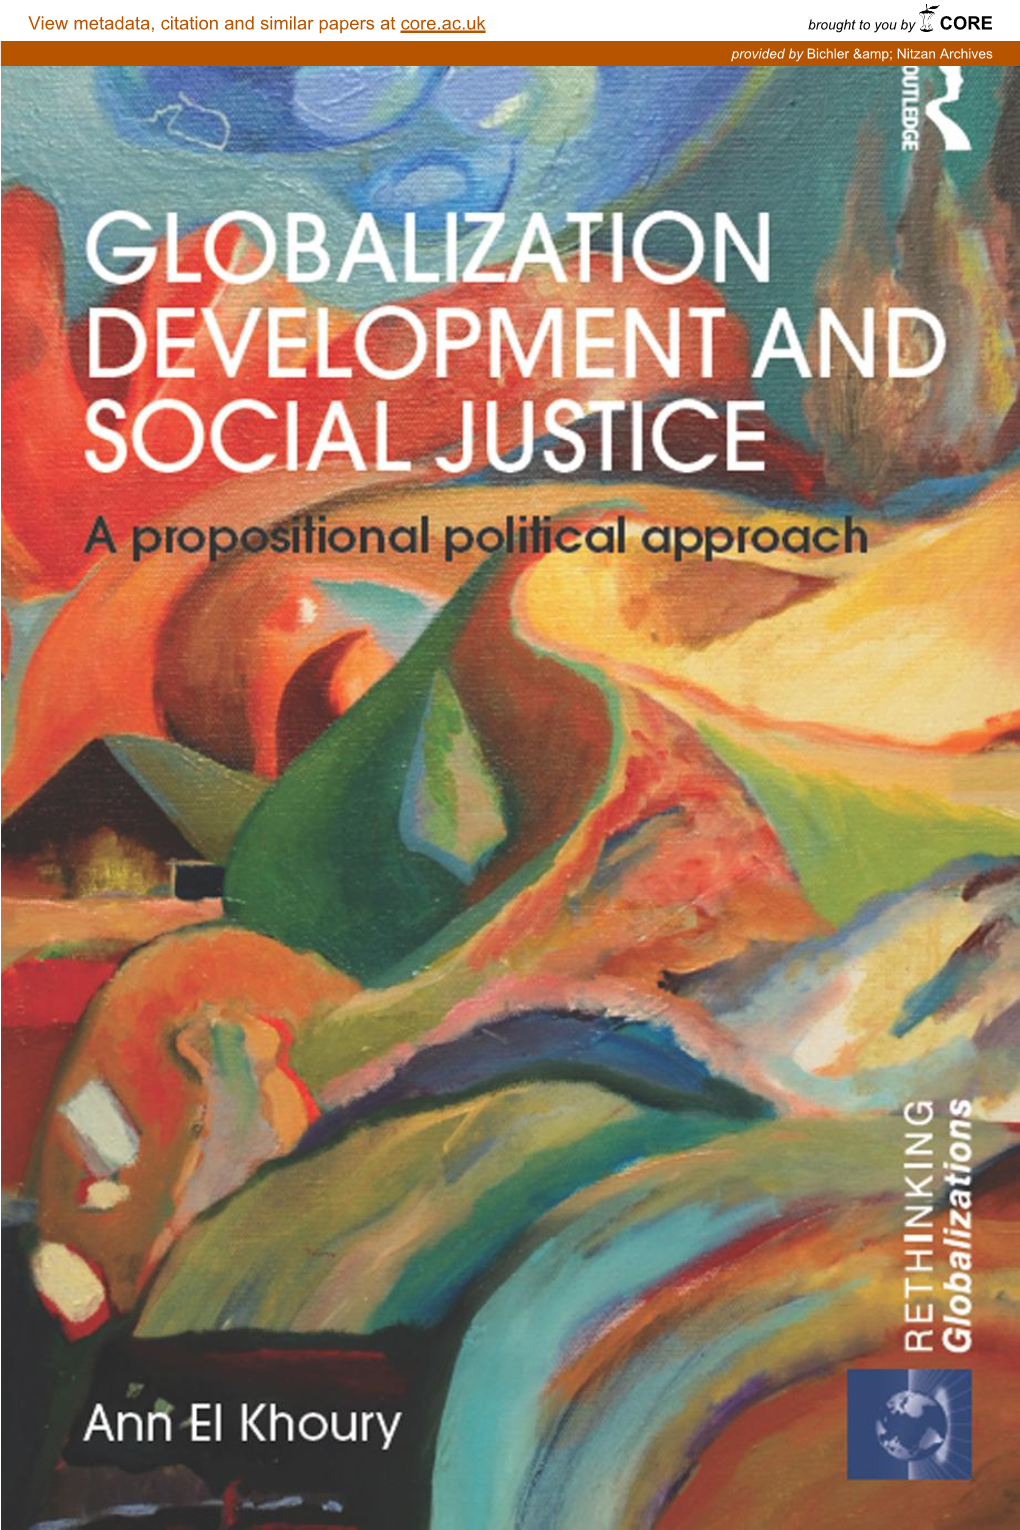 Globalization, Development and Social Justice